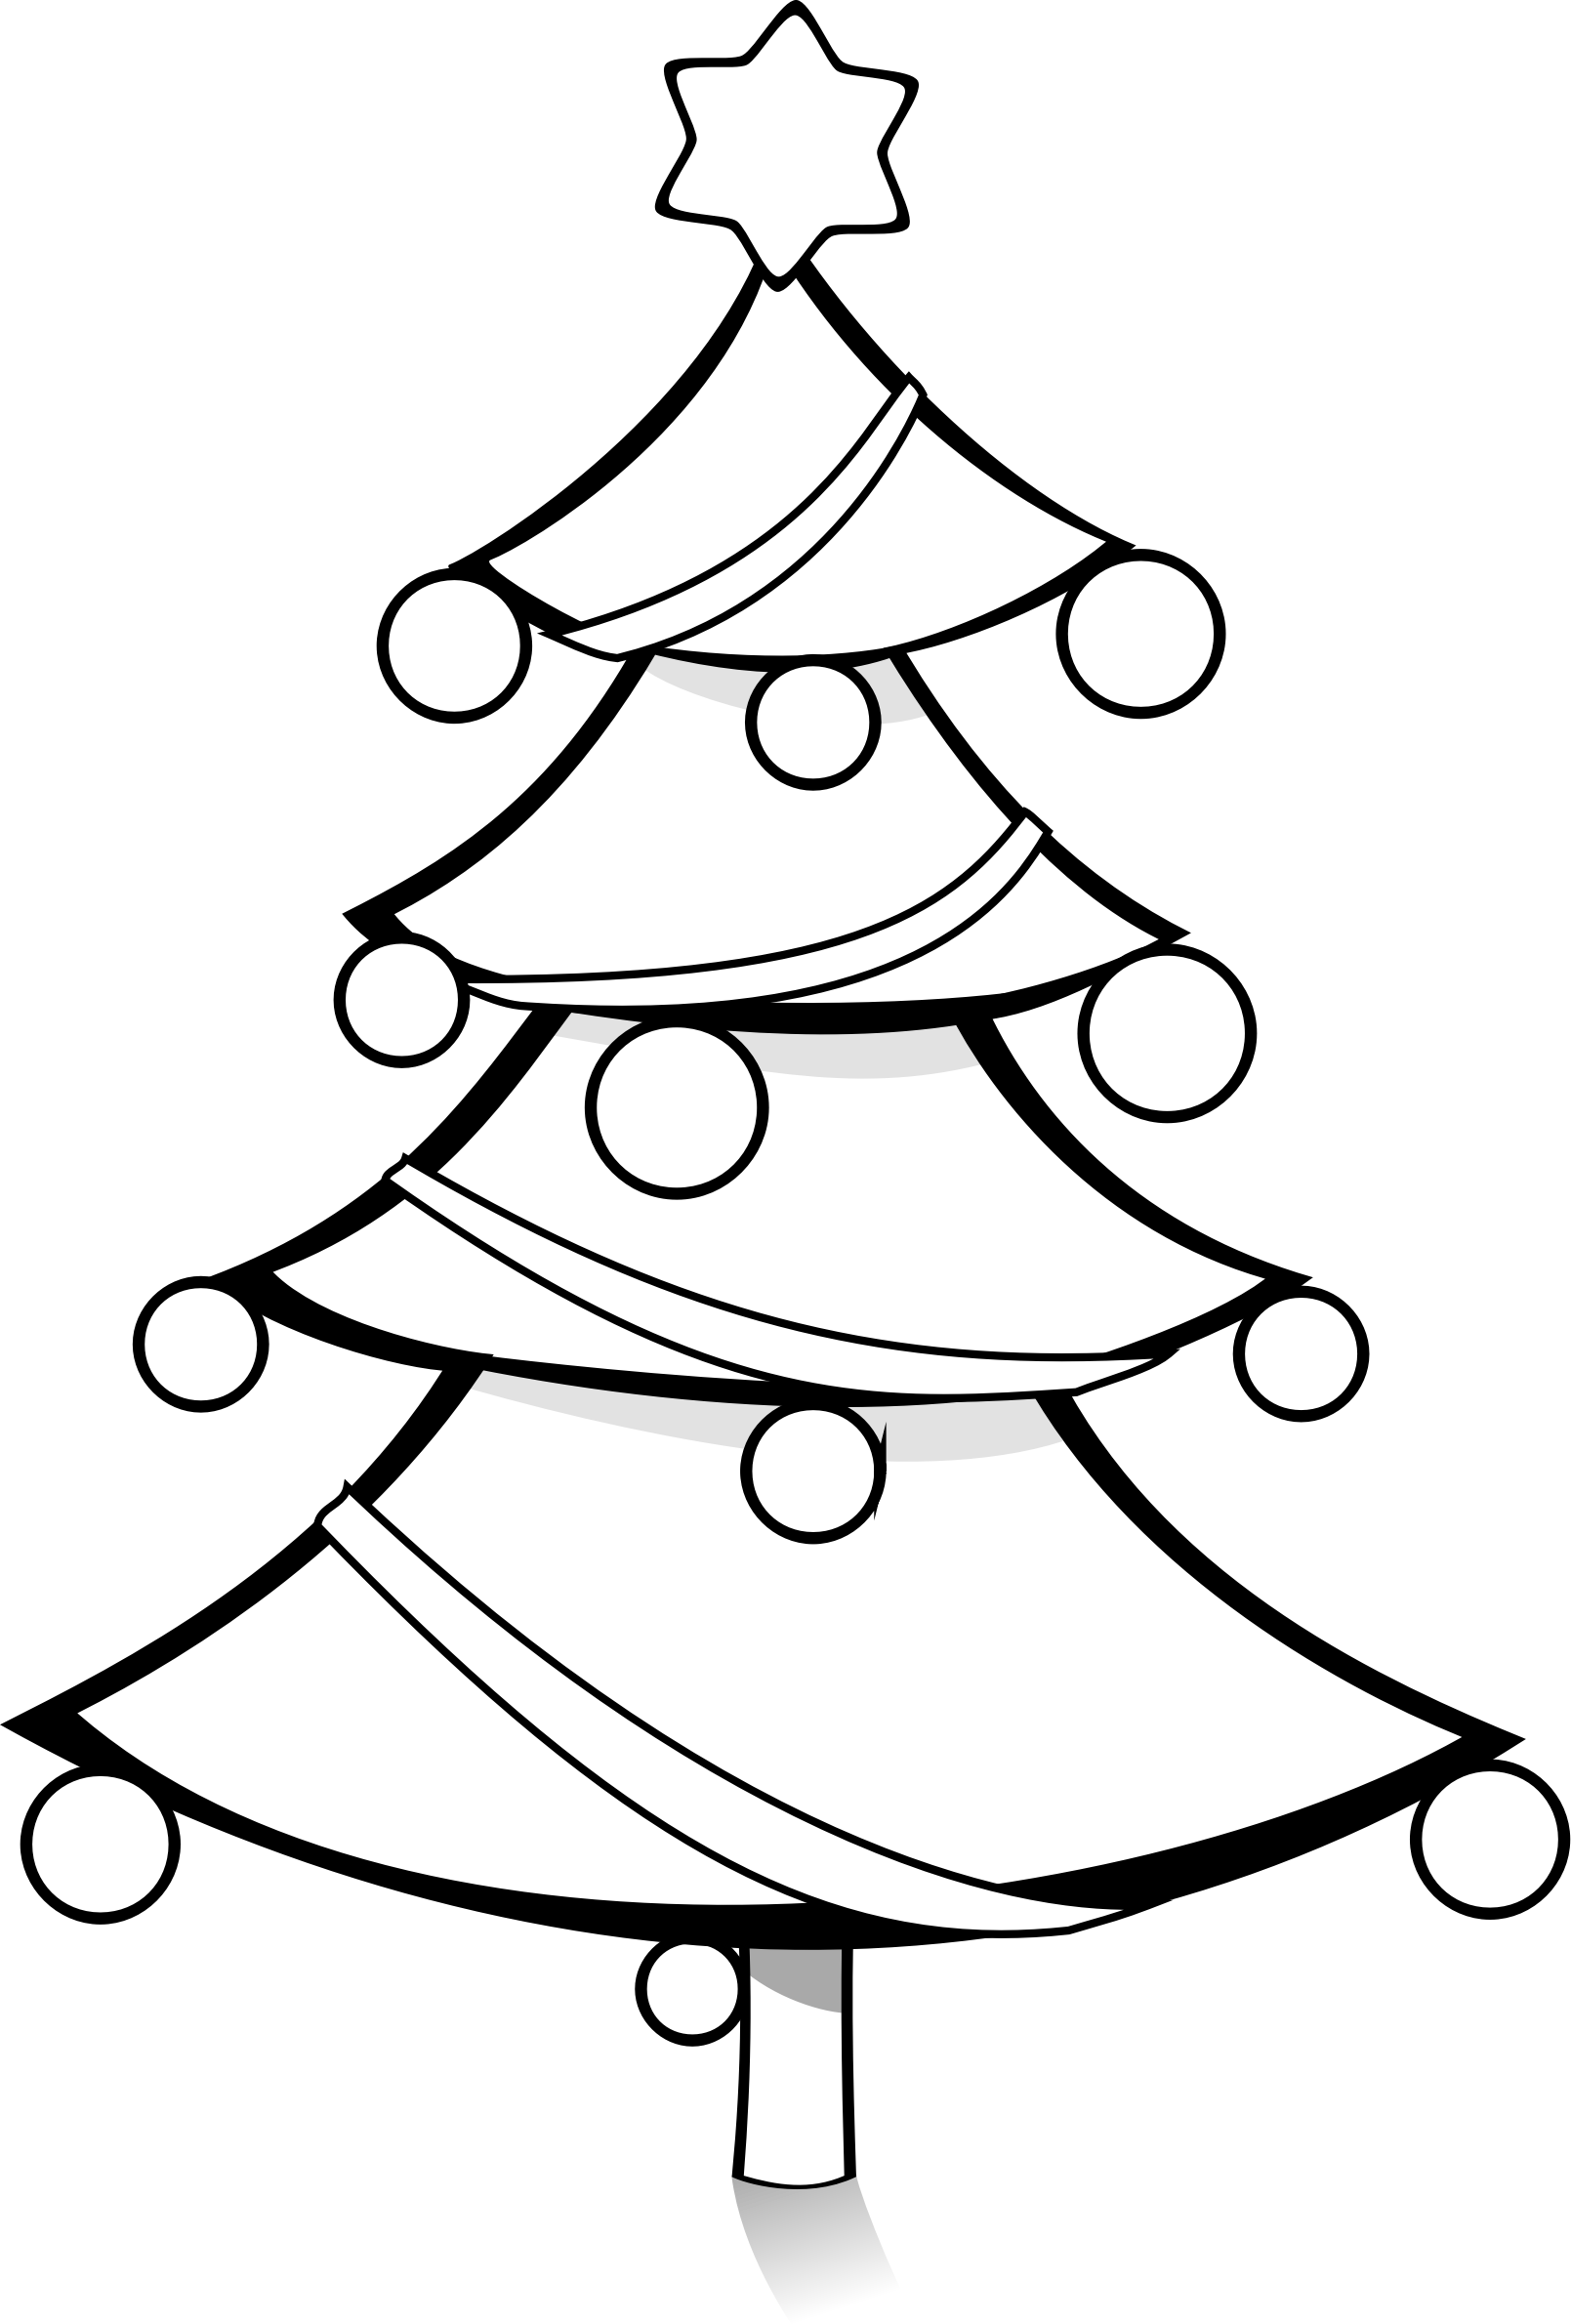 Black And White Christmas Tree Clipart - ClipArt Best